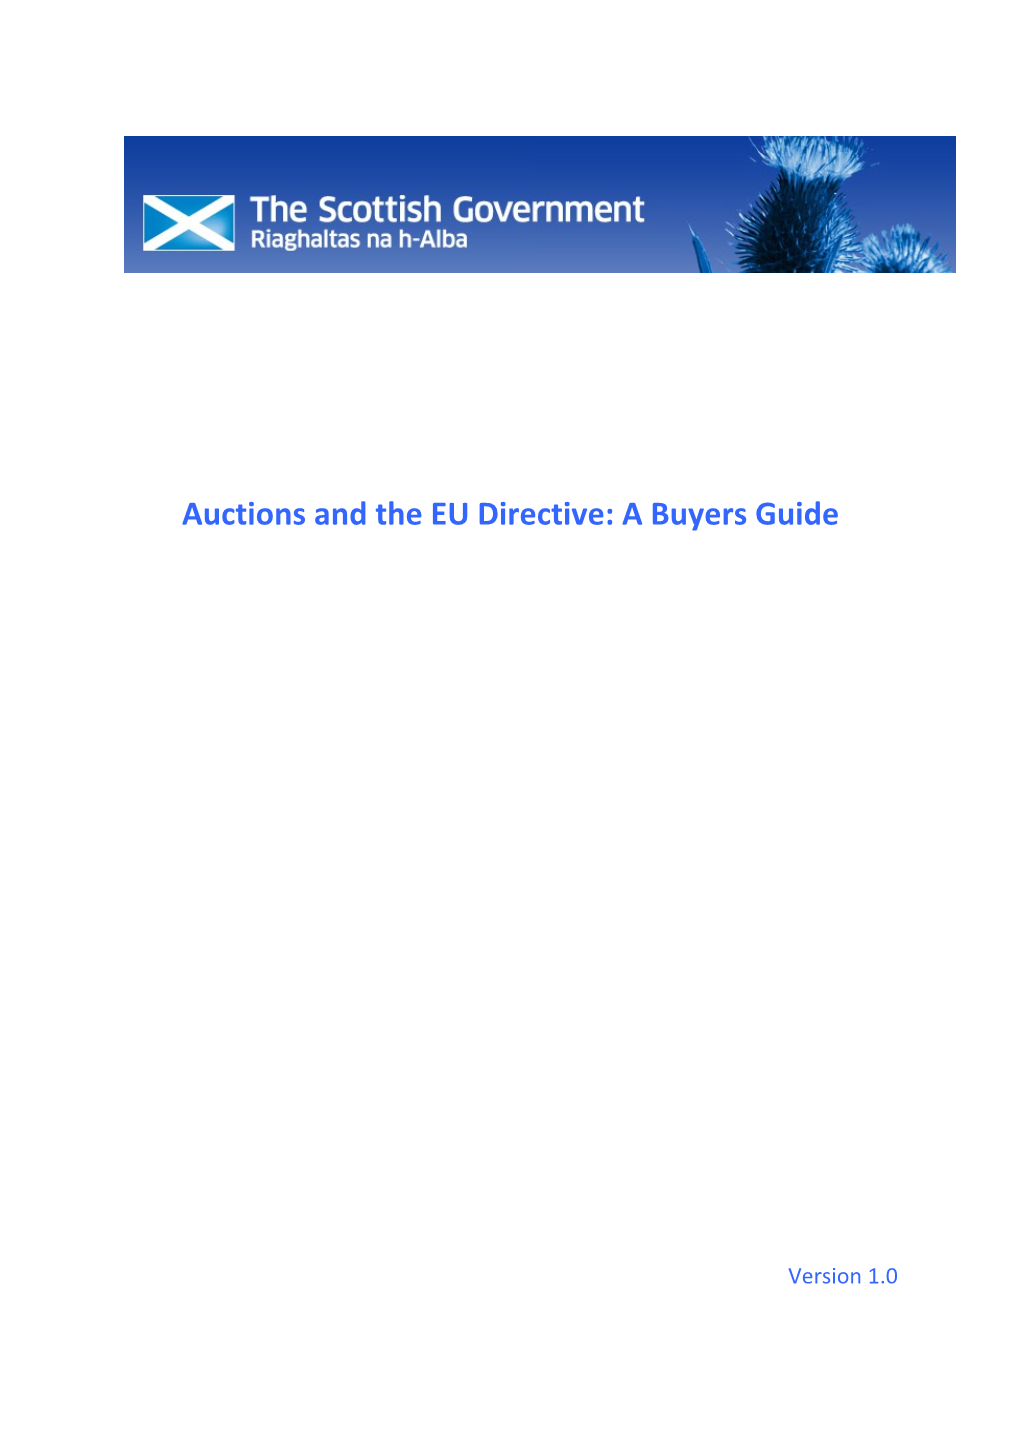 Requirements of the New EU Directive